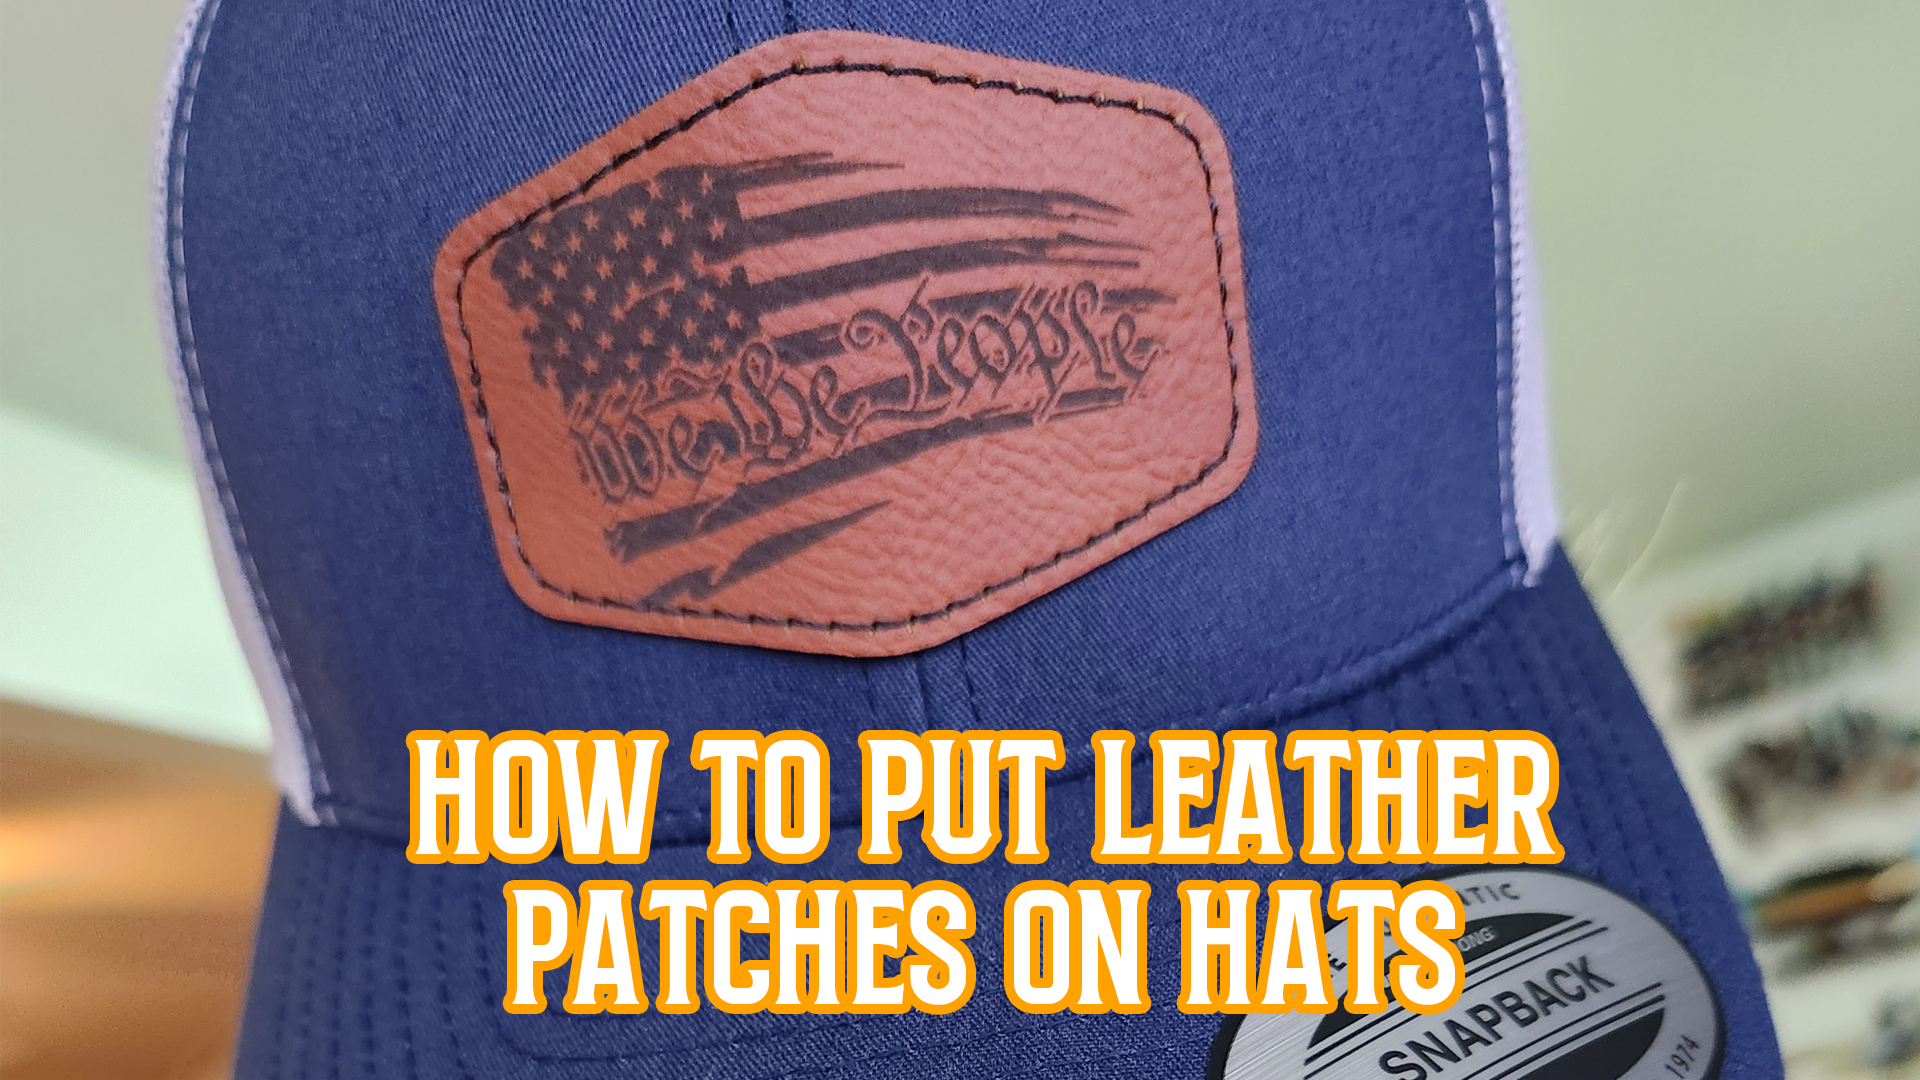 Dirty Humor Hats, Down With the Thickness Hat, Leather Patch Hat